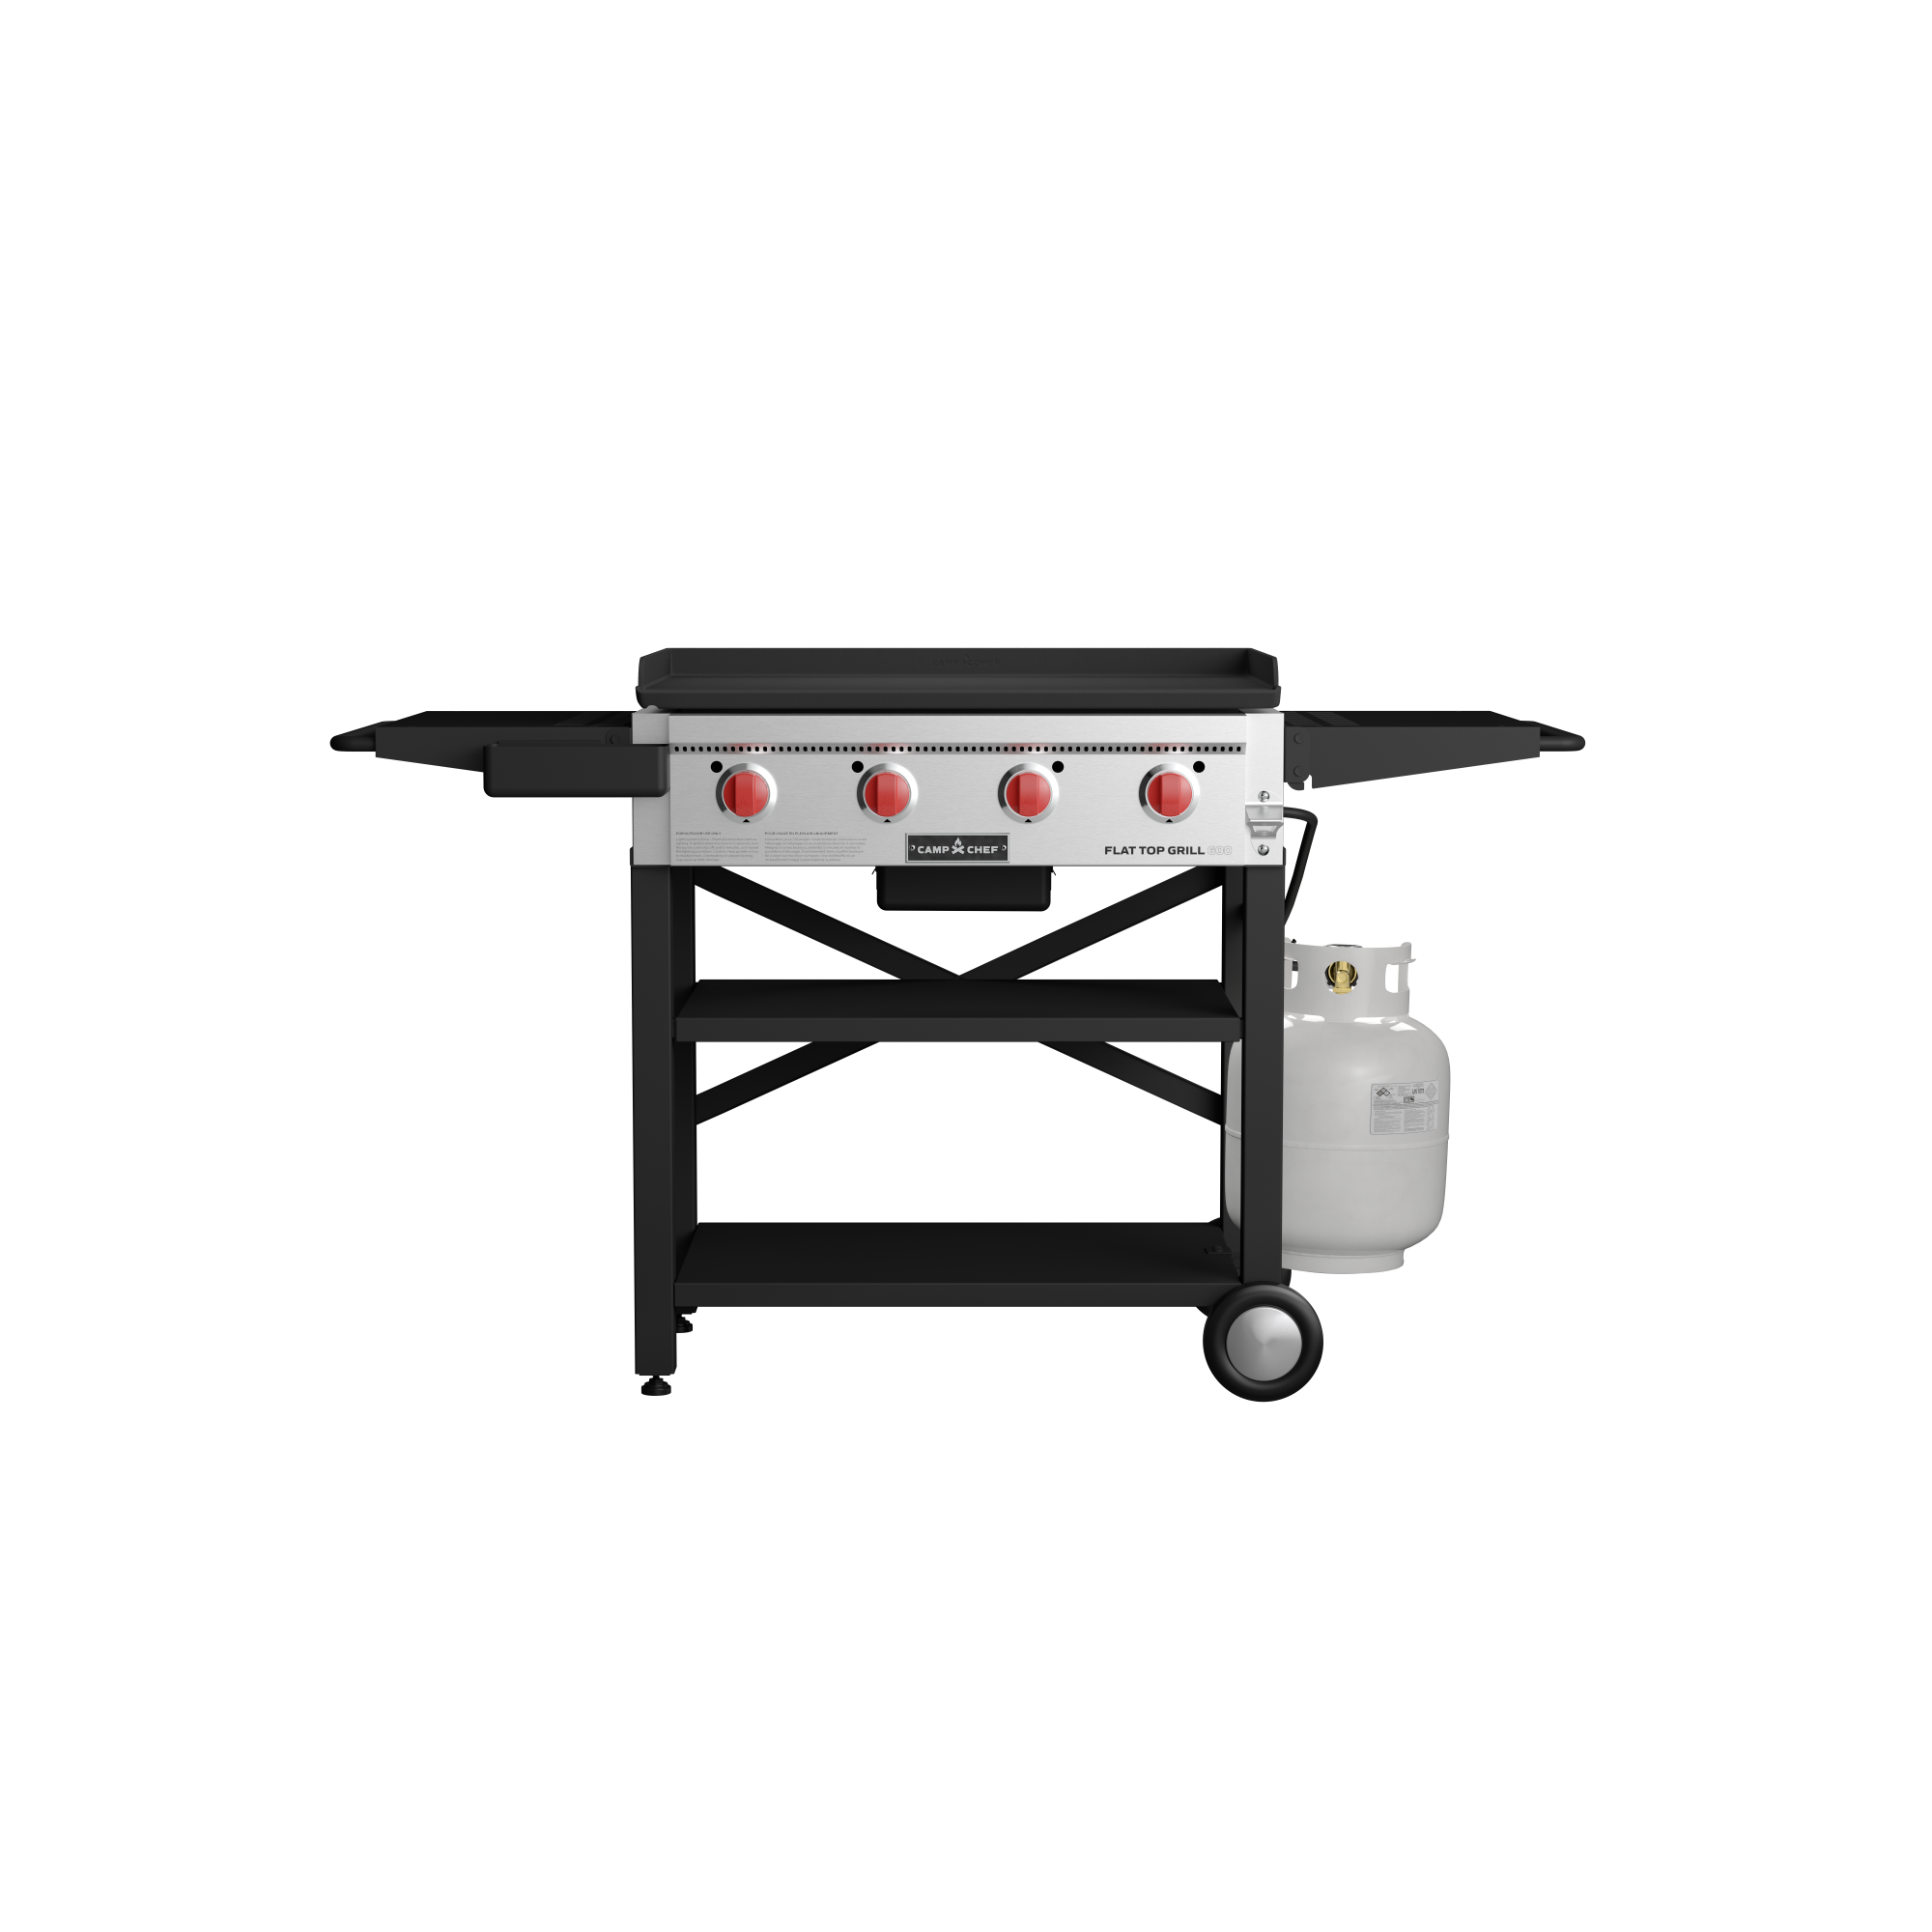 10 Things to Know Before Buying a Camp Chef Griddle - Drizzle Me